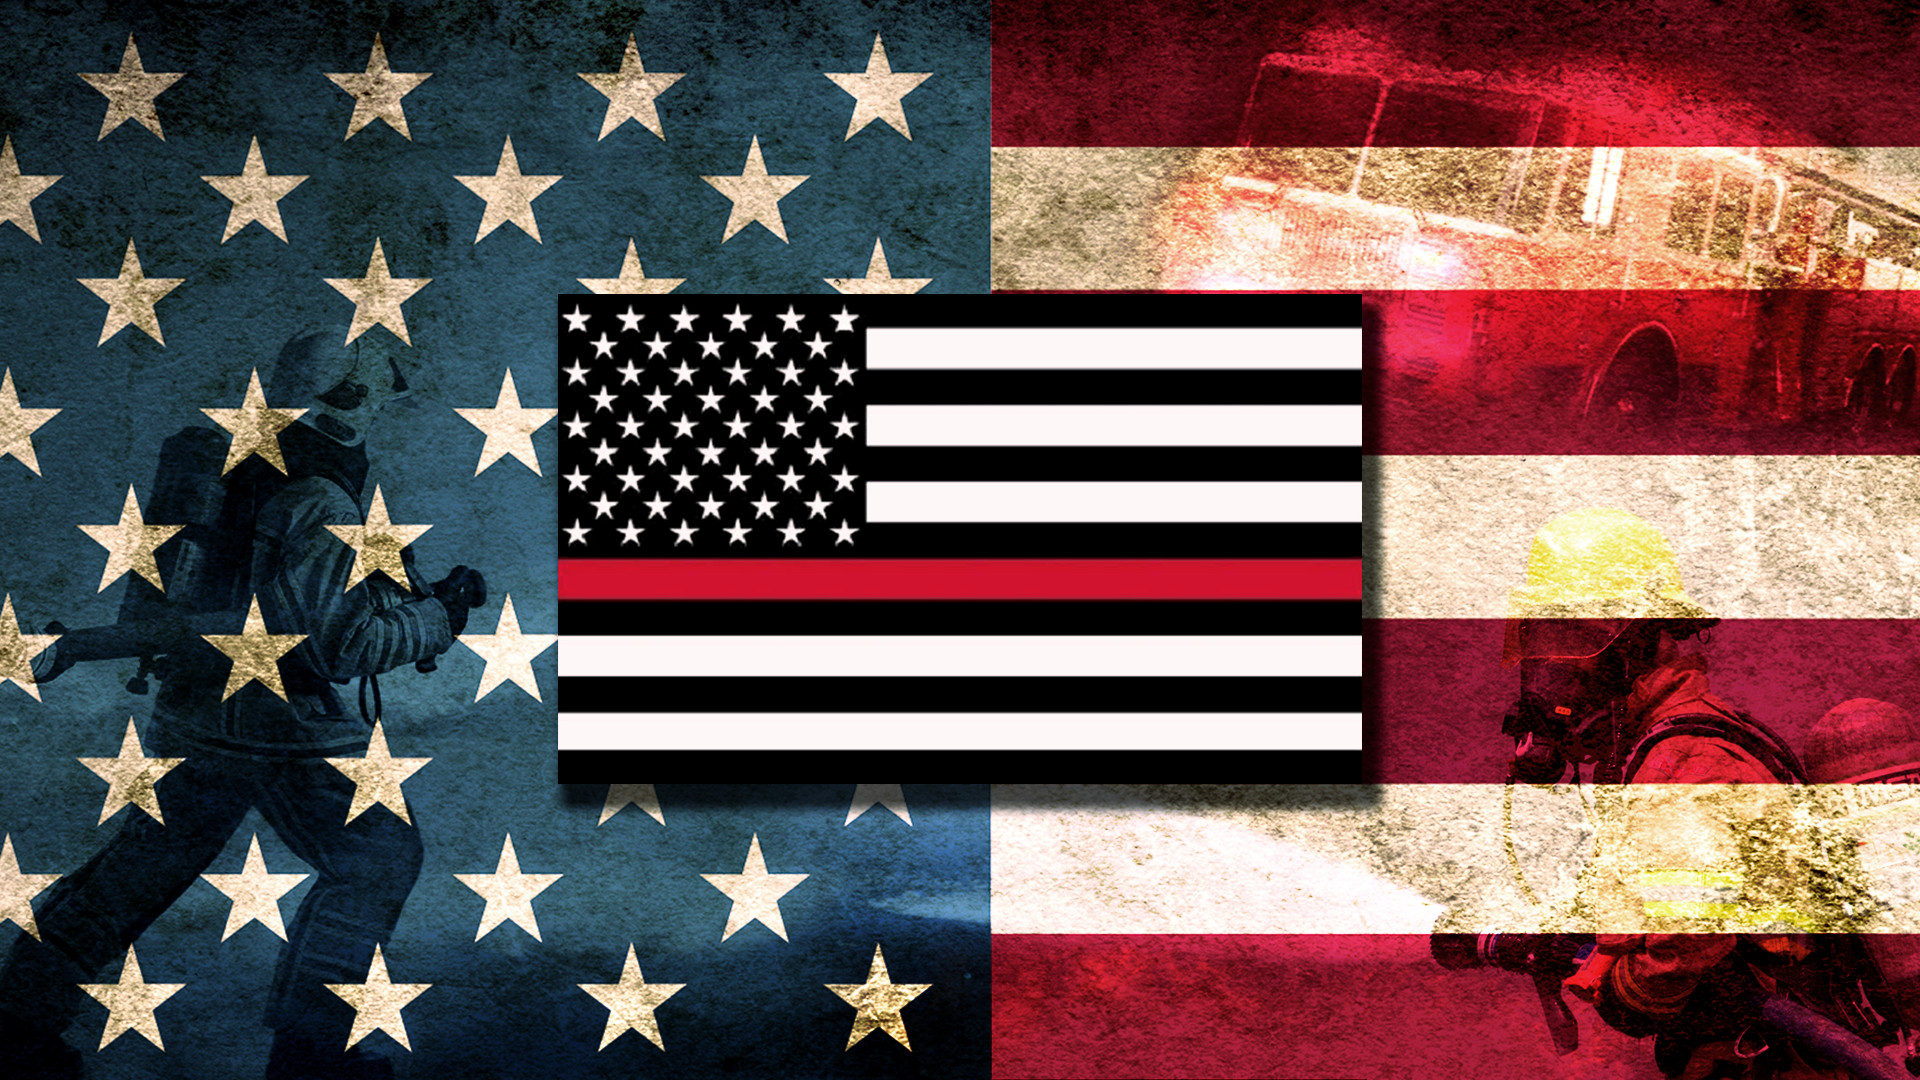 1920x1080 ... fire department wallpaper fire department backgrounds and images ...